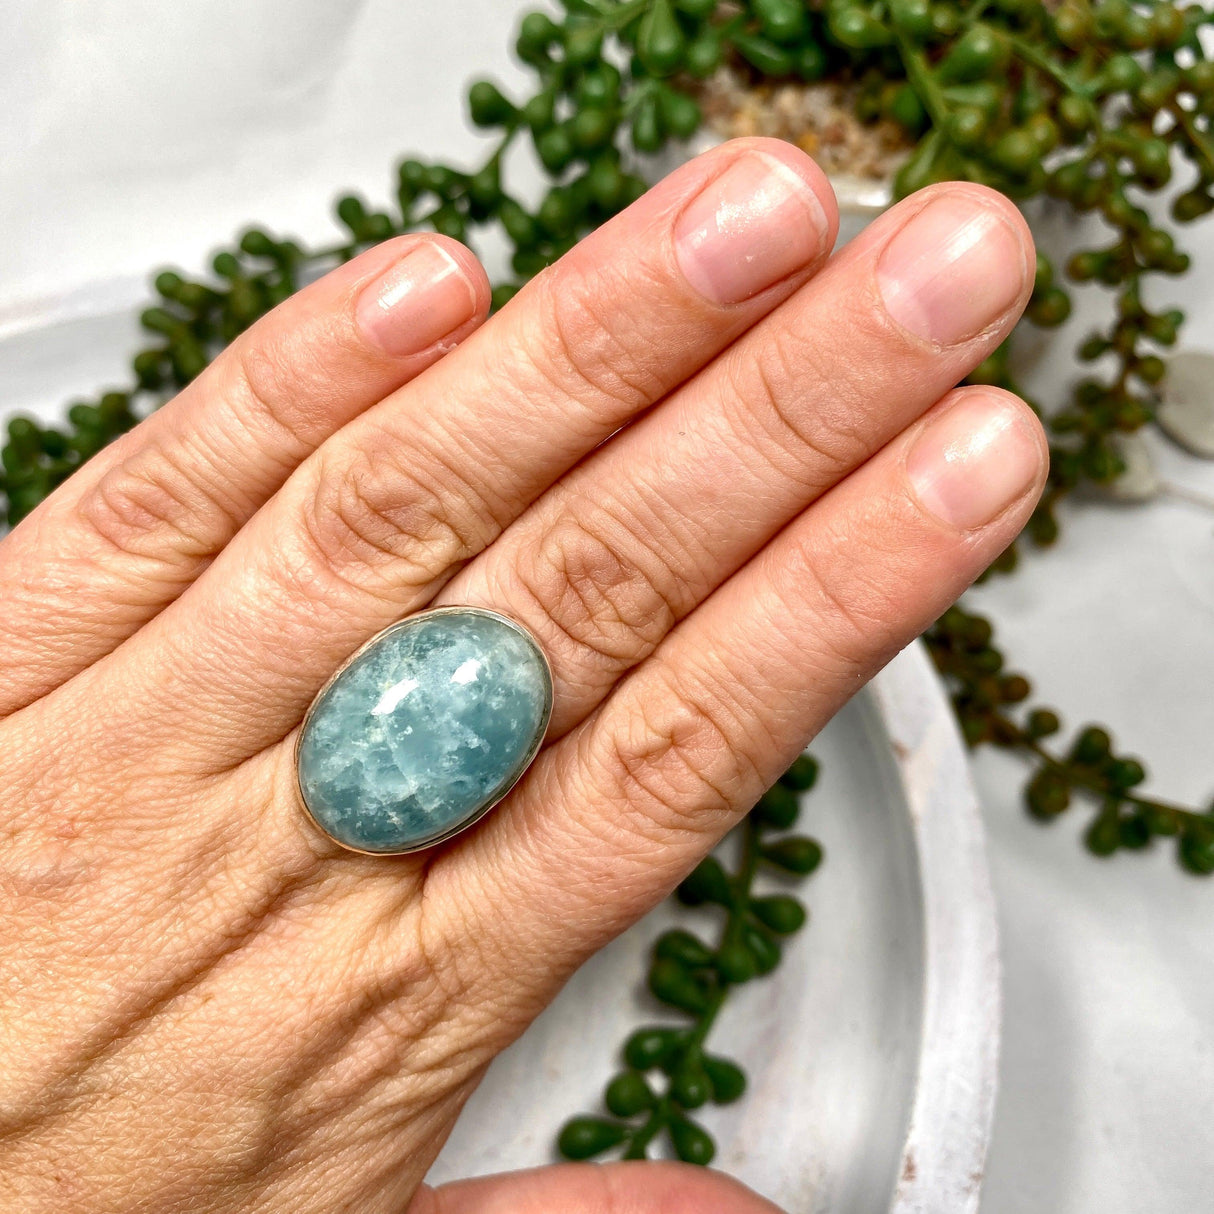 Aquamarine Oval Cabochon Ring with Hammered Band Size 8 KPGJ1355 - Nature's Magick